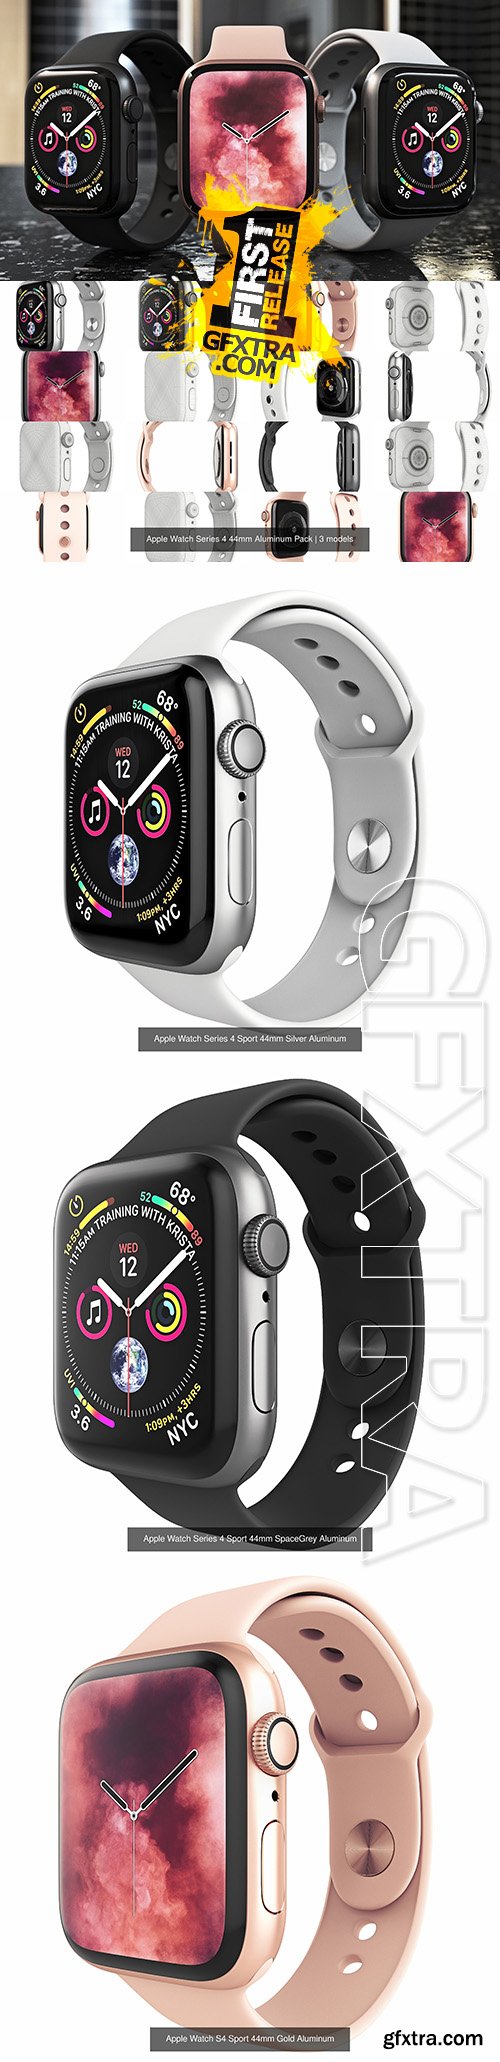 Cgtrader - Apple Watch Series 4 44mm Aluminum Pack 3D Model Collection